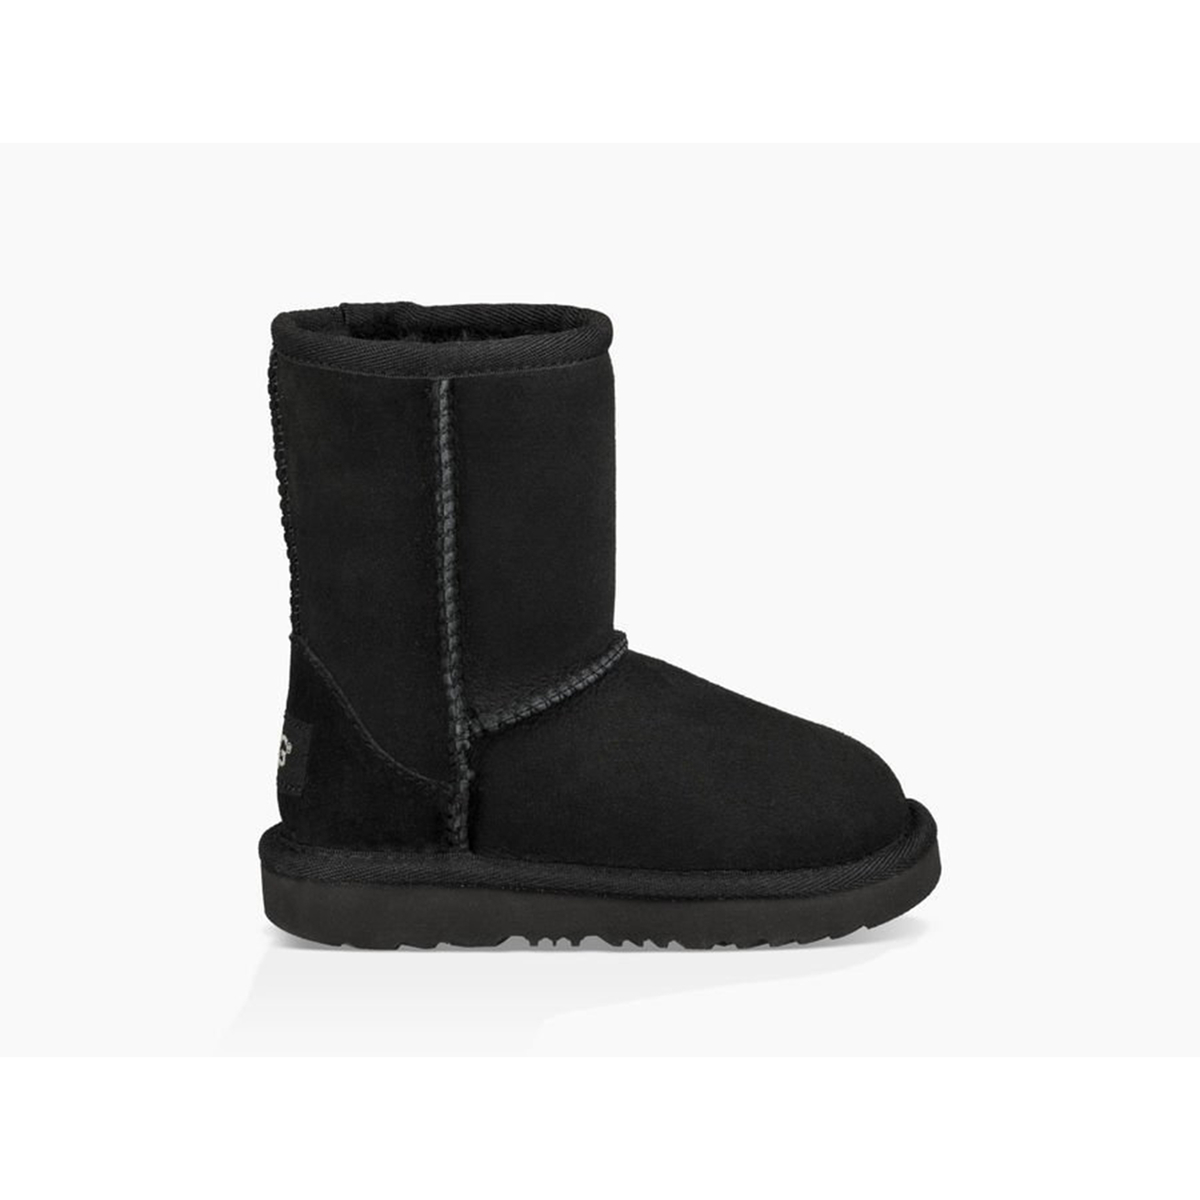 Image of Kids Classic II Fur-Lined Ankle Boots